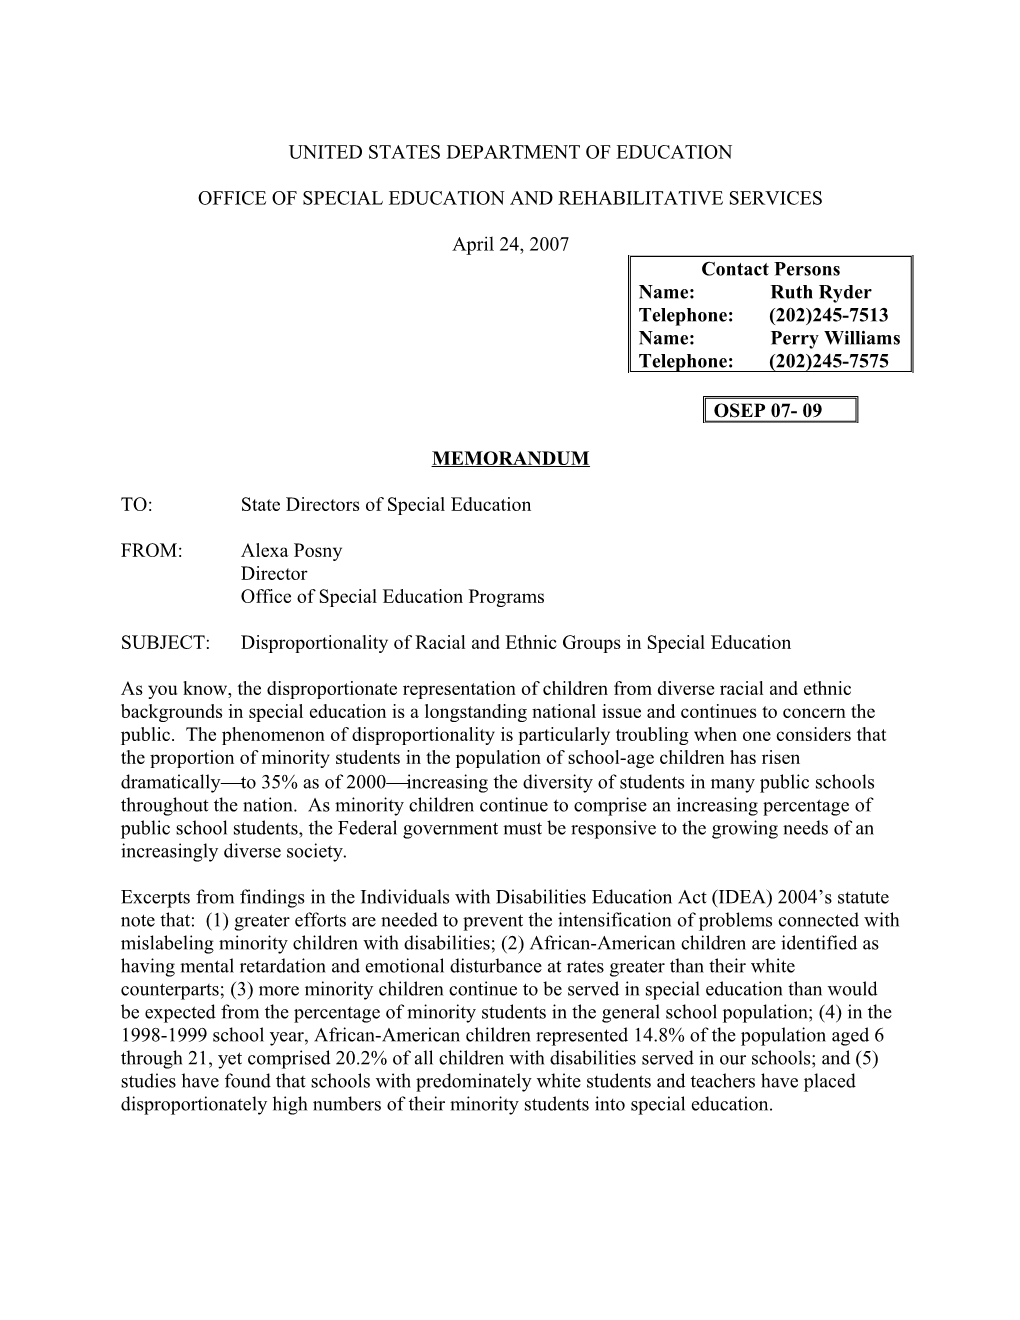 OSEP MEMO 07-09 Disproportionality of Racial and Ethnic Groups in Special Education